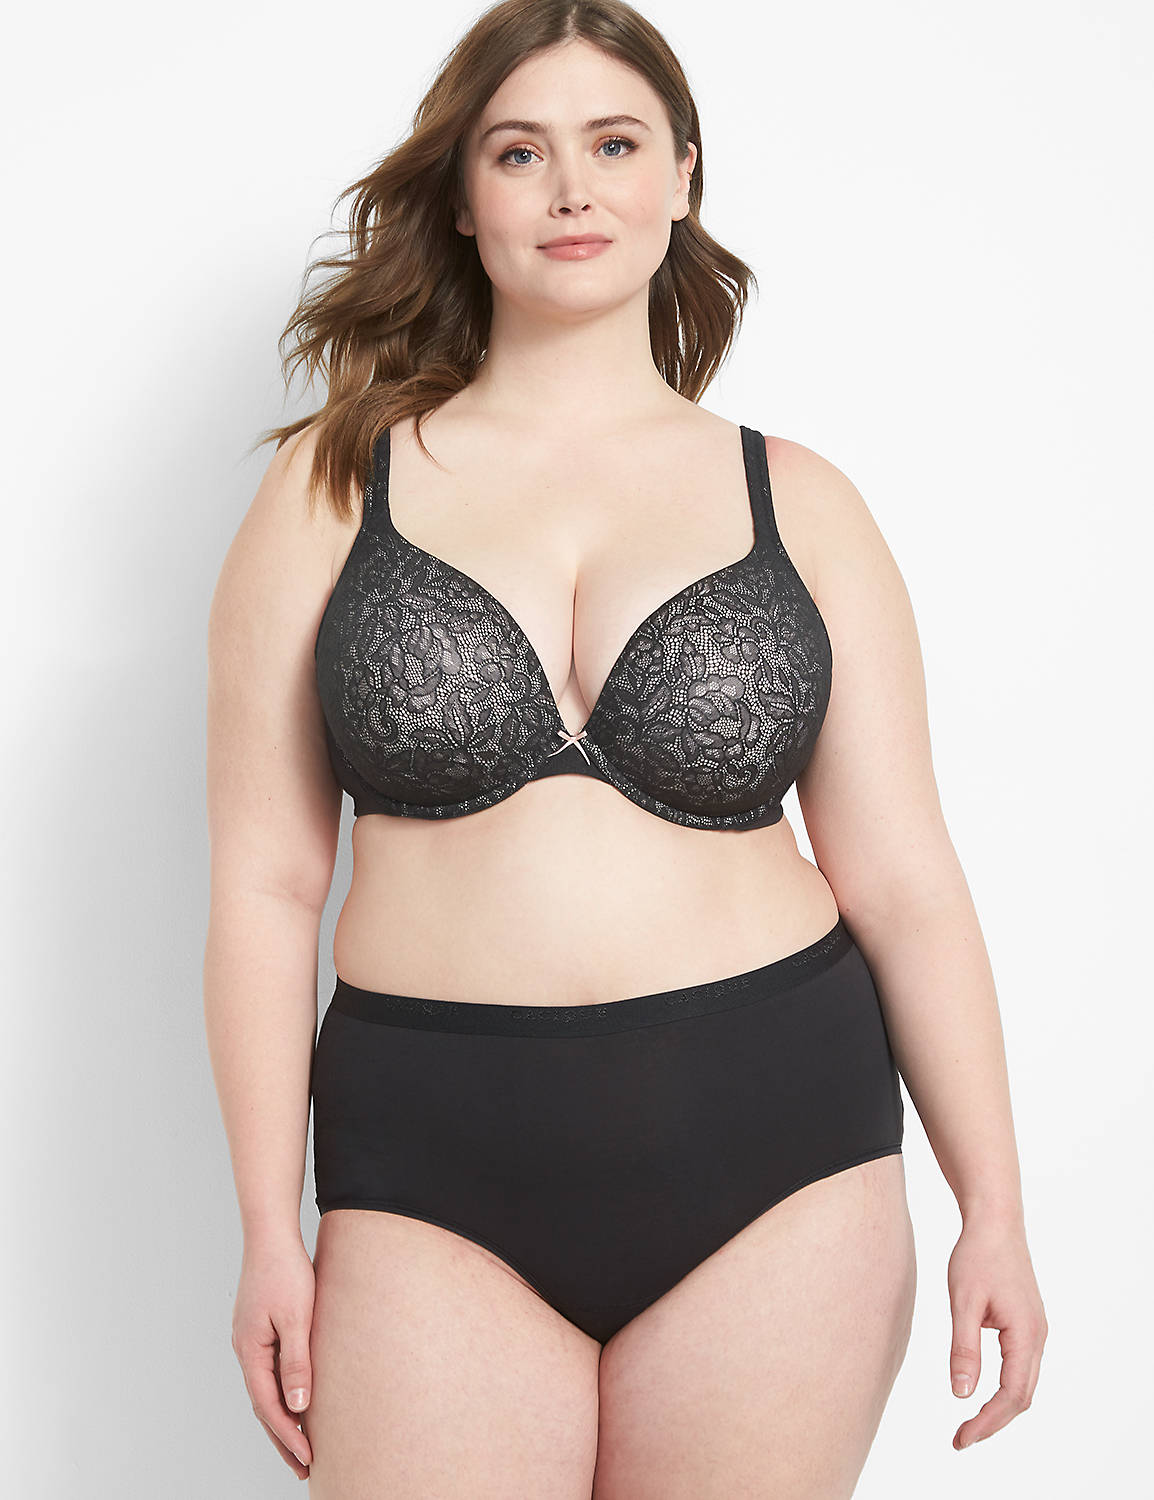 Cacique LANE BRYANT Bra 42H Sheer Black with White Lace Trim